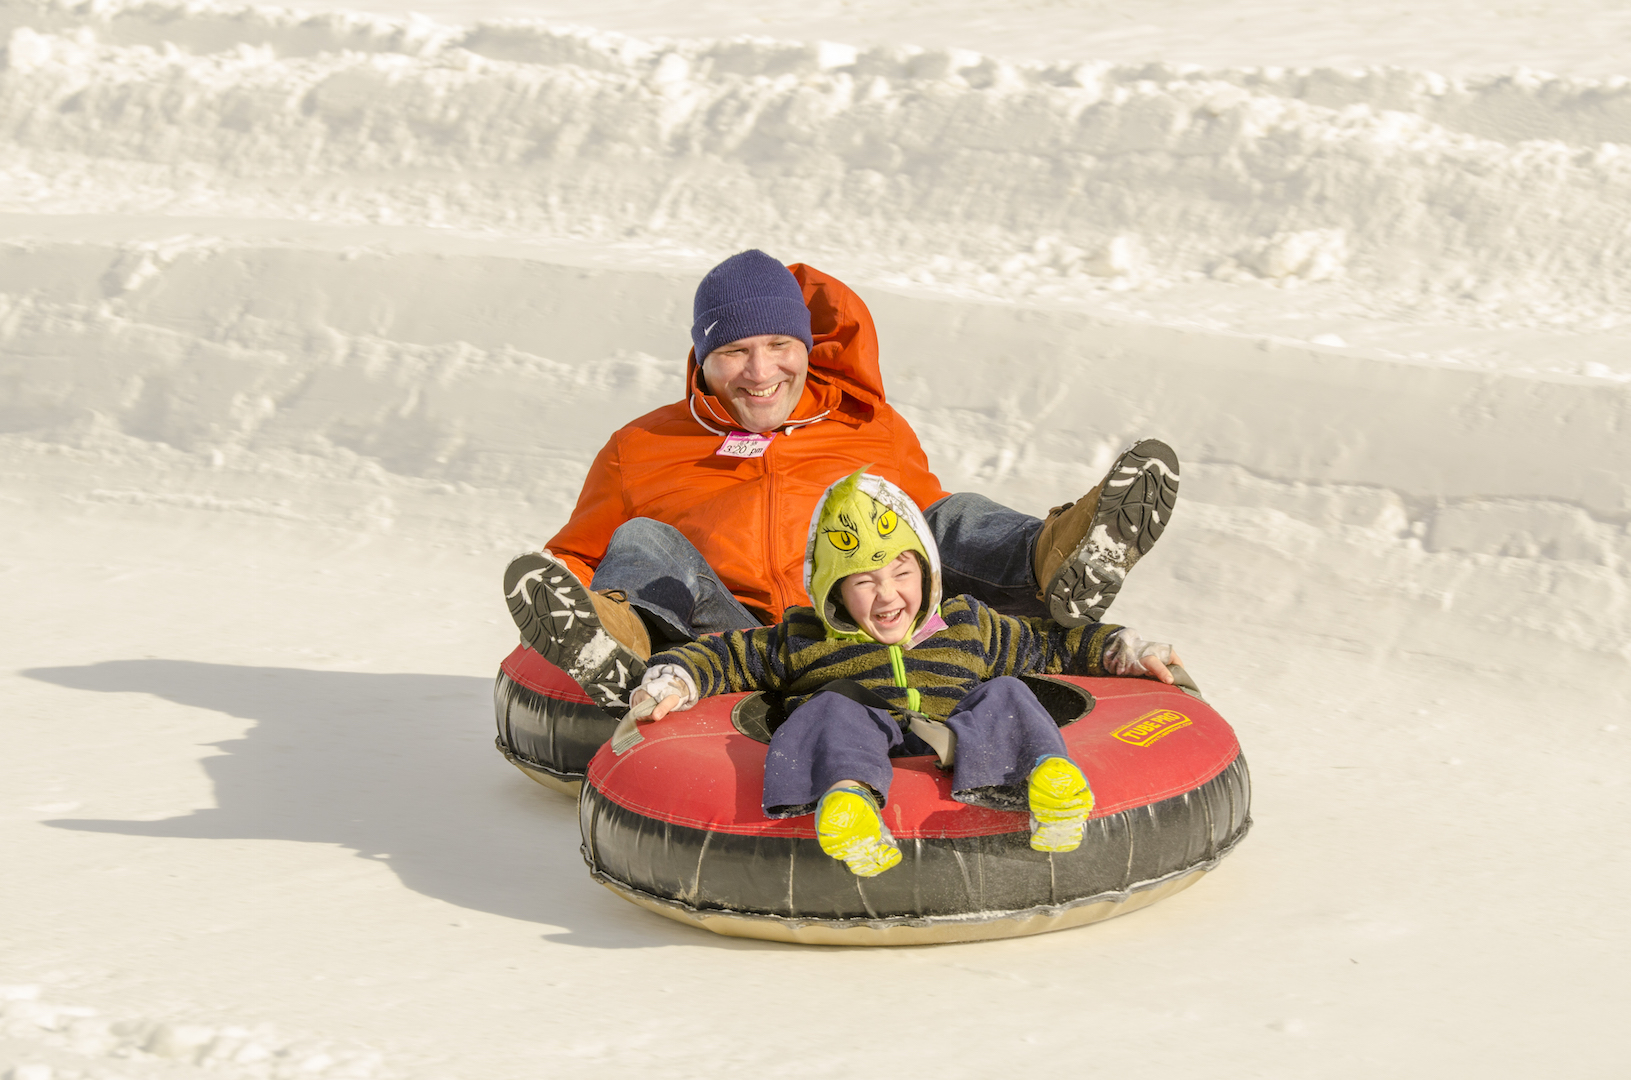 Snow Tubing at Snow Trails